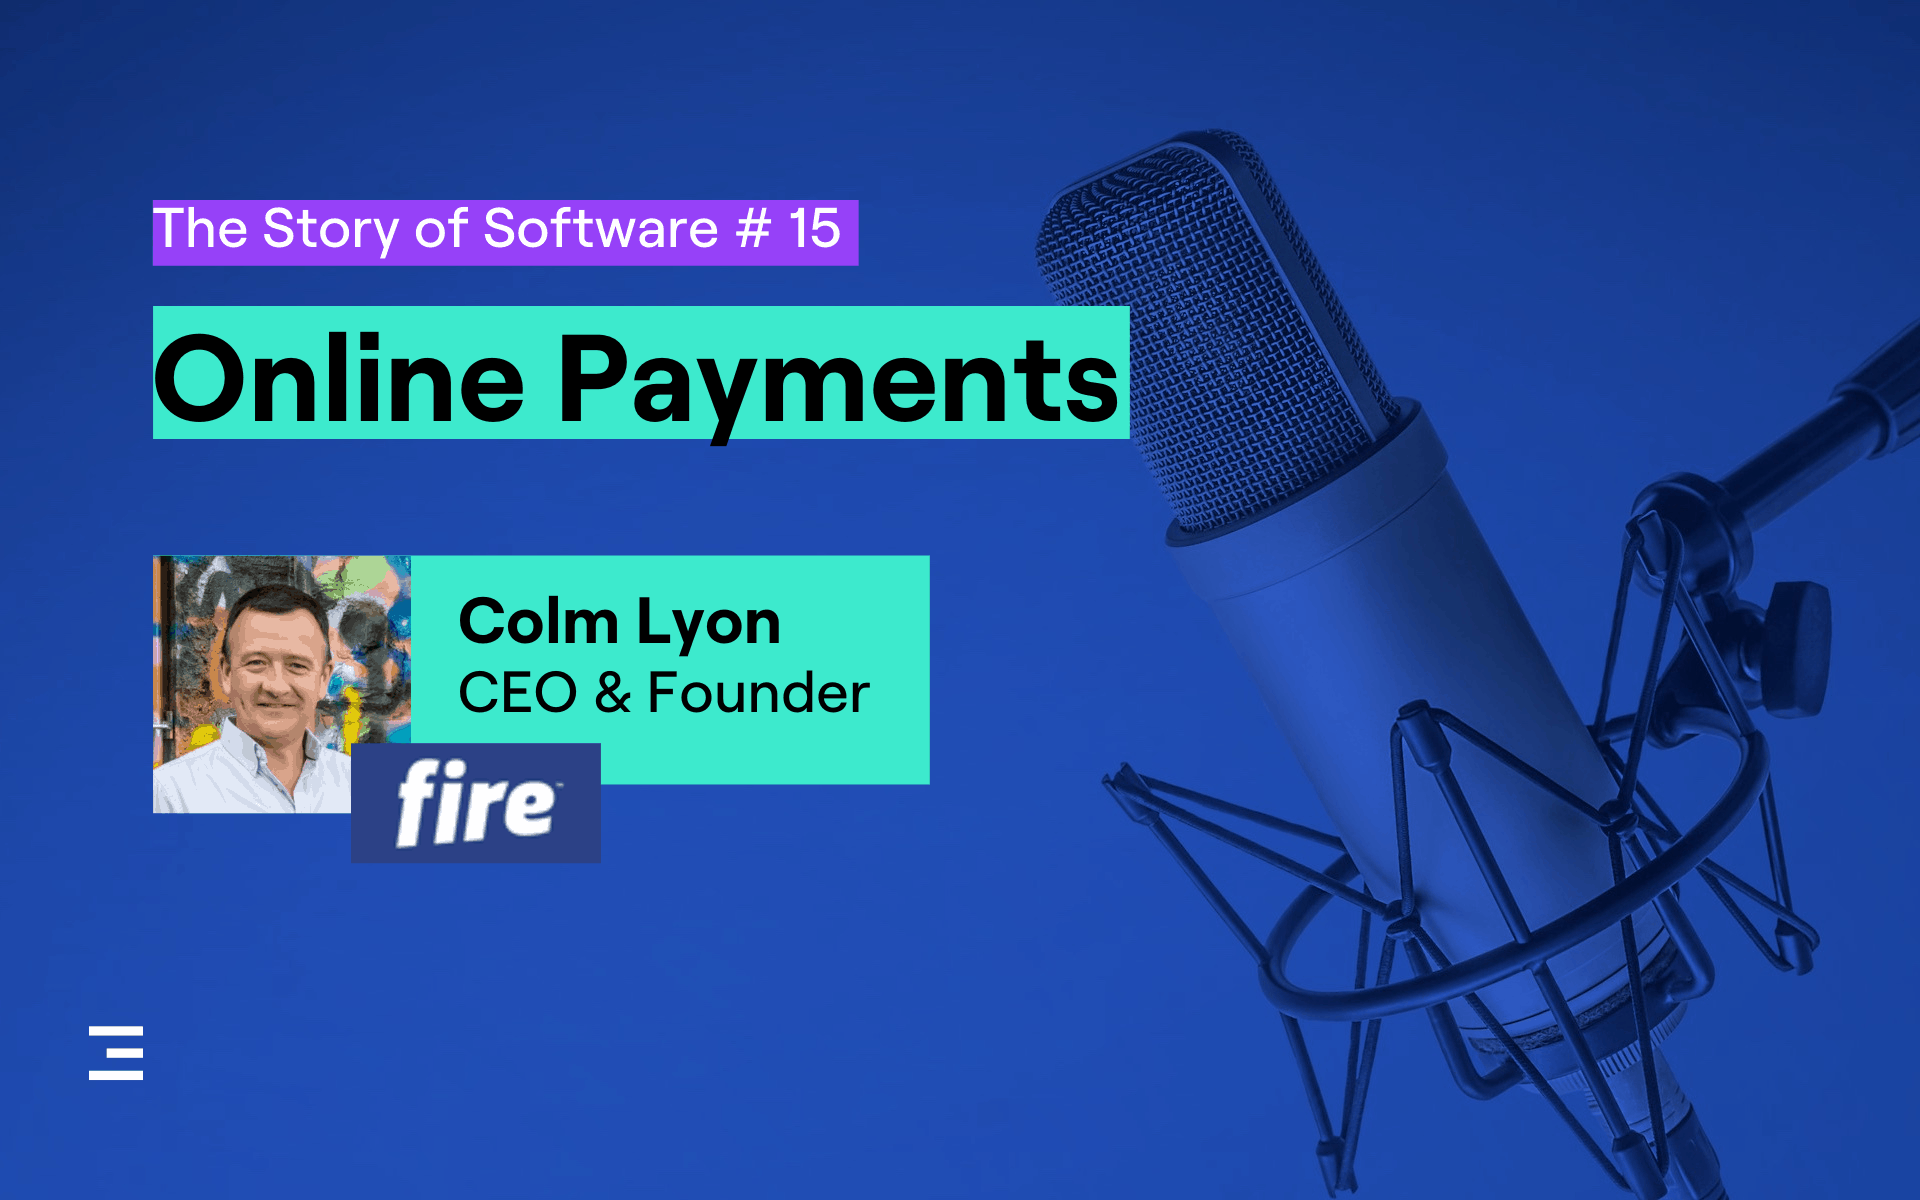 Story of software podcast by zartis episode 15 - online payments